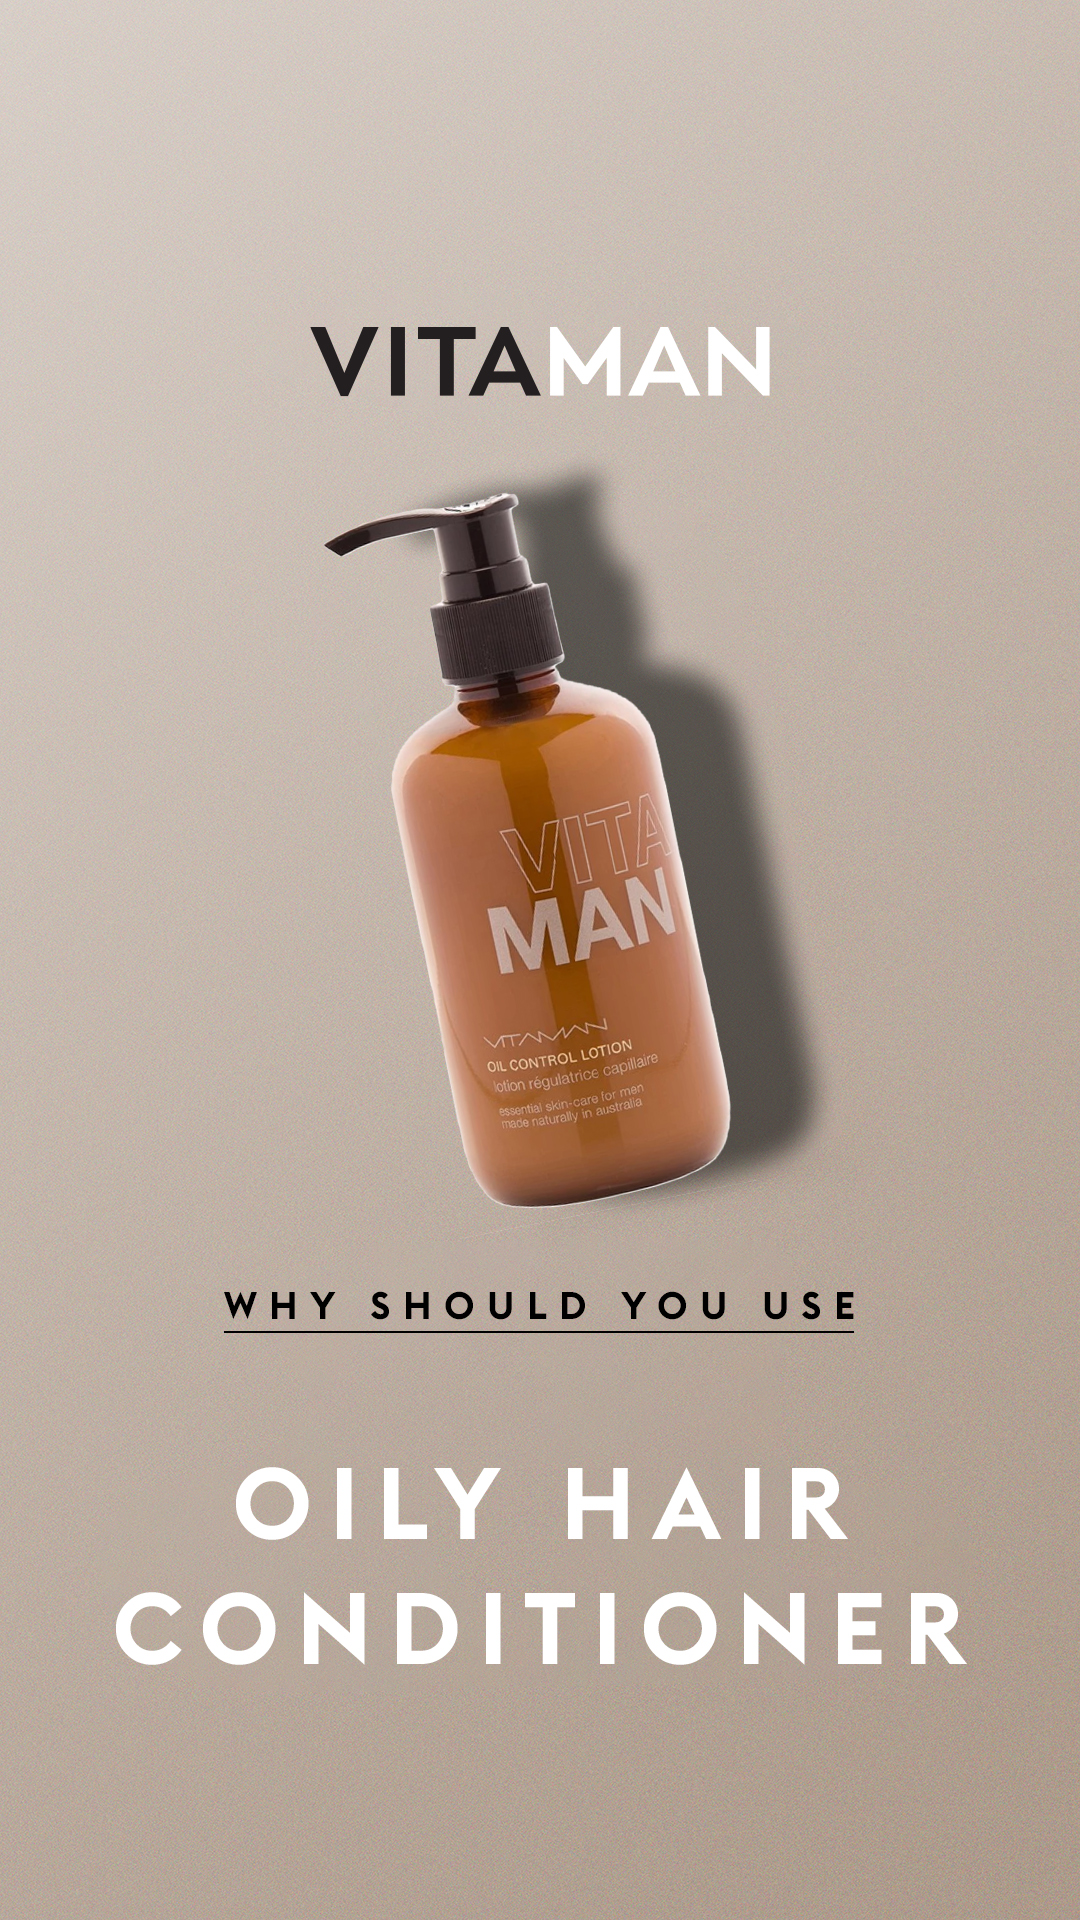 Benefits Of Using Oily Hair Conditioner For Men - Natural Skin & Hair  Products For Men Over 40 | VITAMAN USA